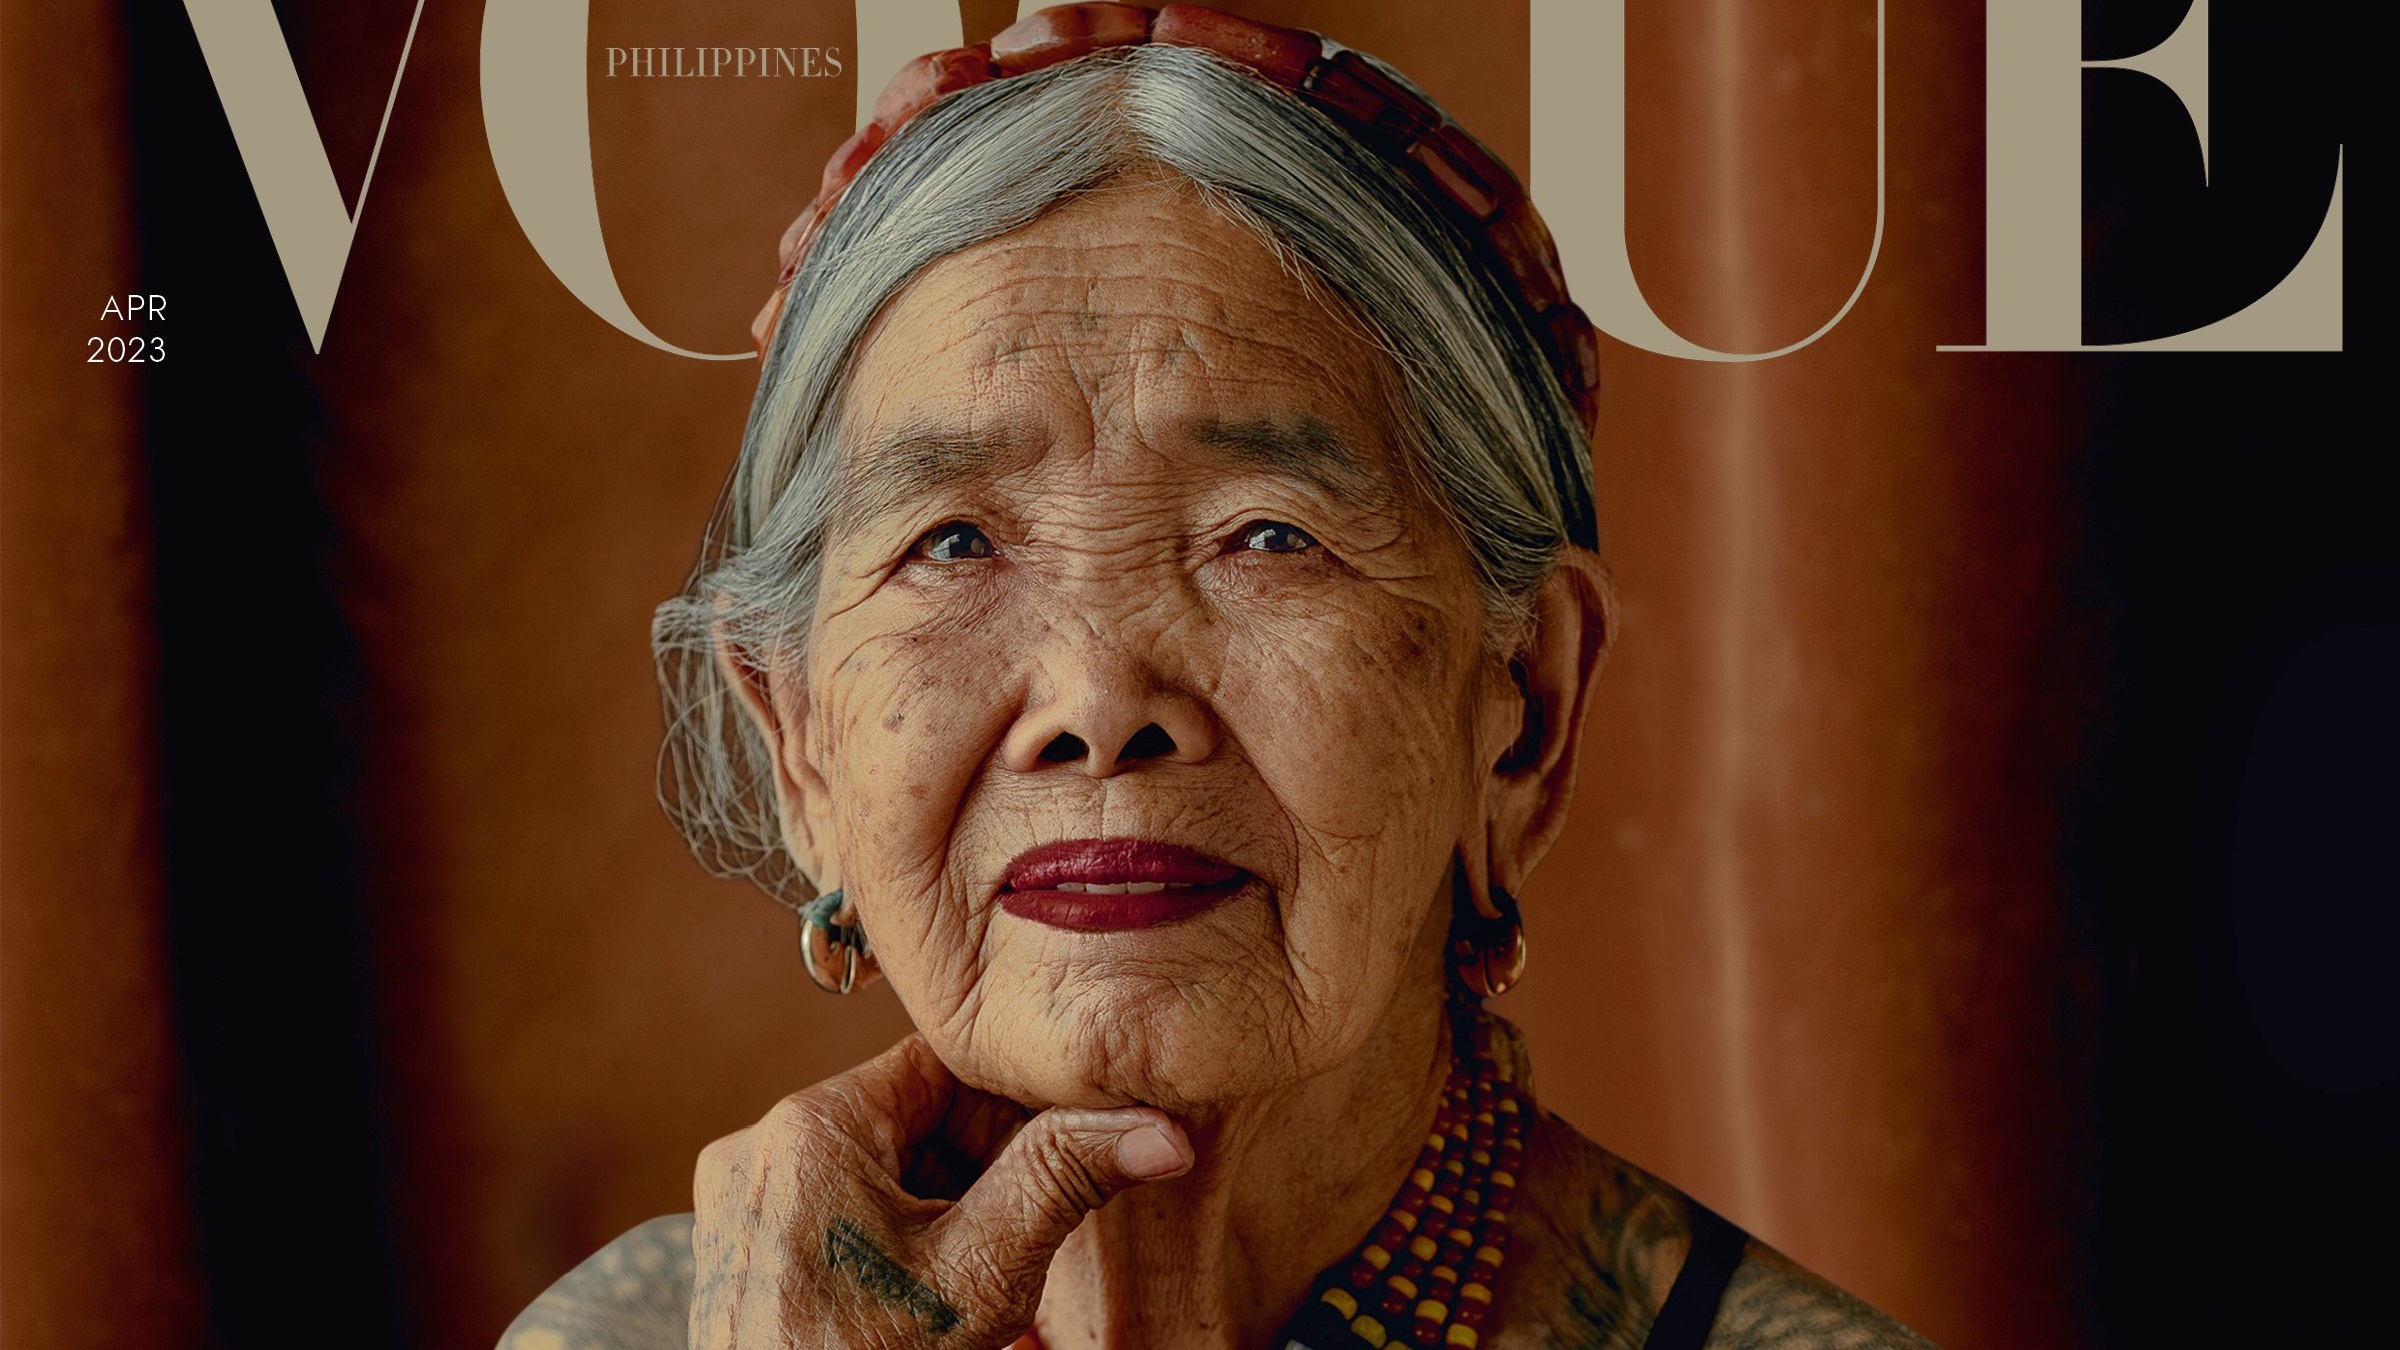 Fashion is exalting women in their 60s and beyond. But it’ll take more than a few high-profile campaigns and covers to shake fashion’s obsession with youth. Photo: Artu Nepomuceno/Vogue Philippines 